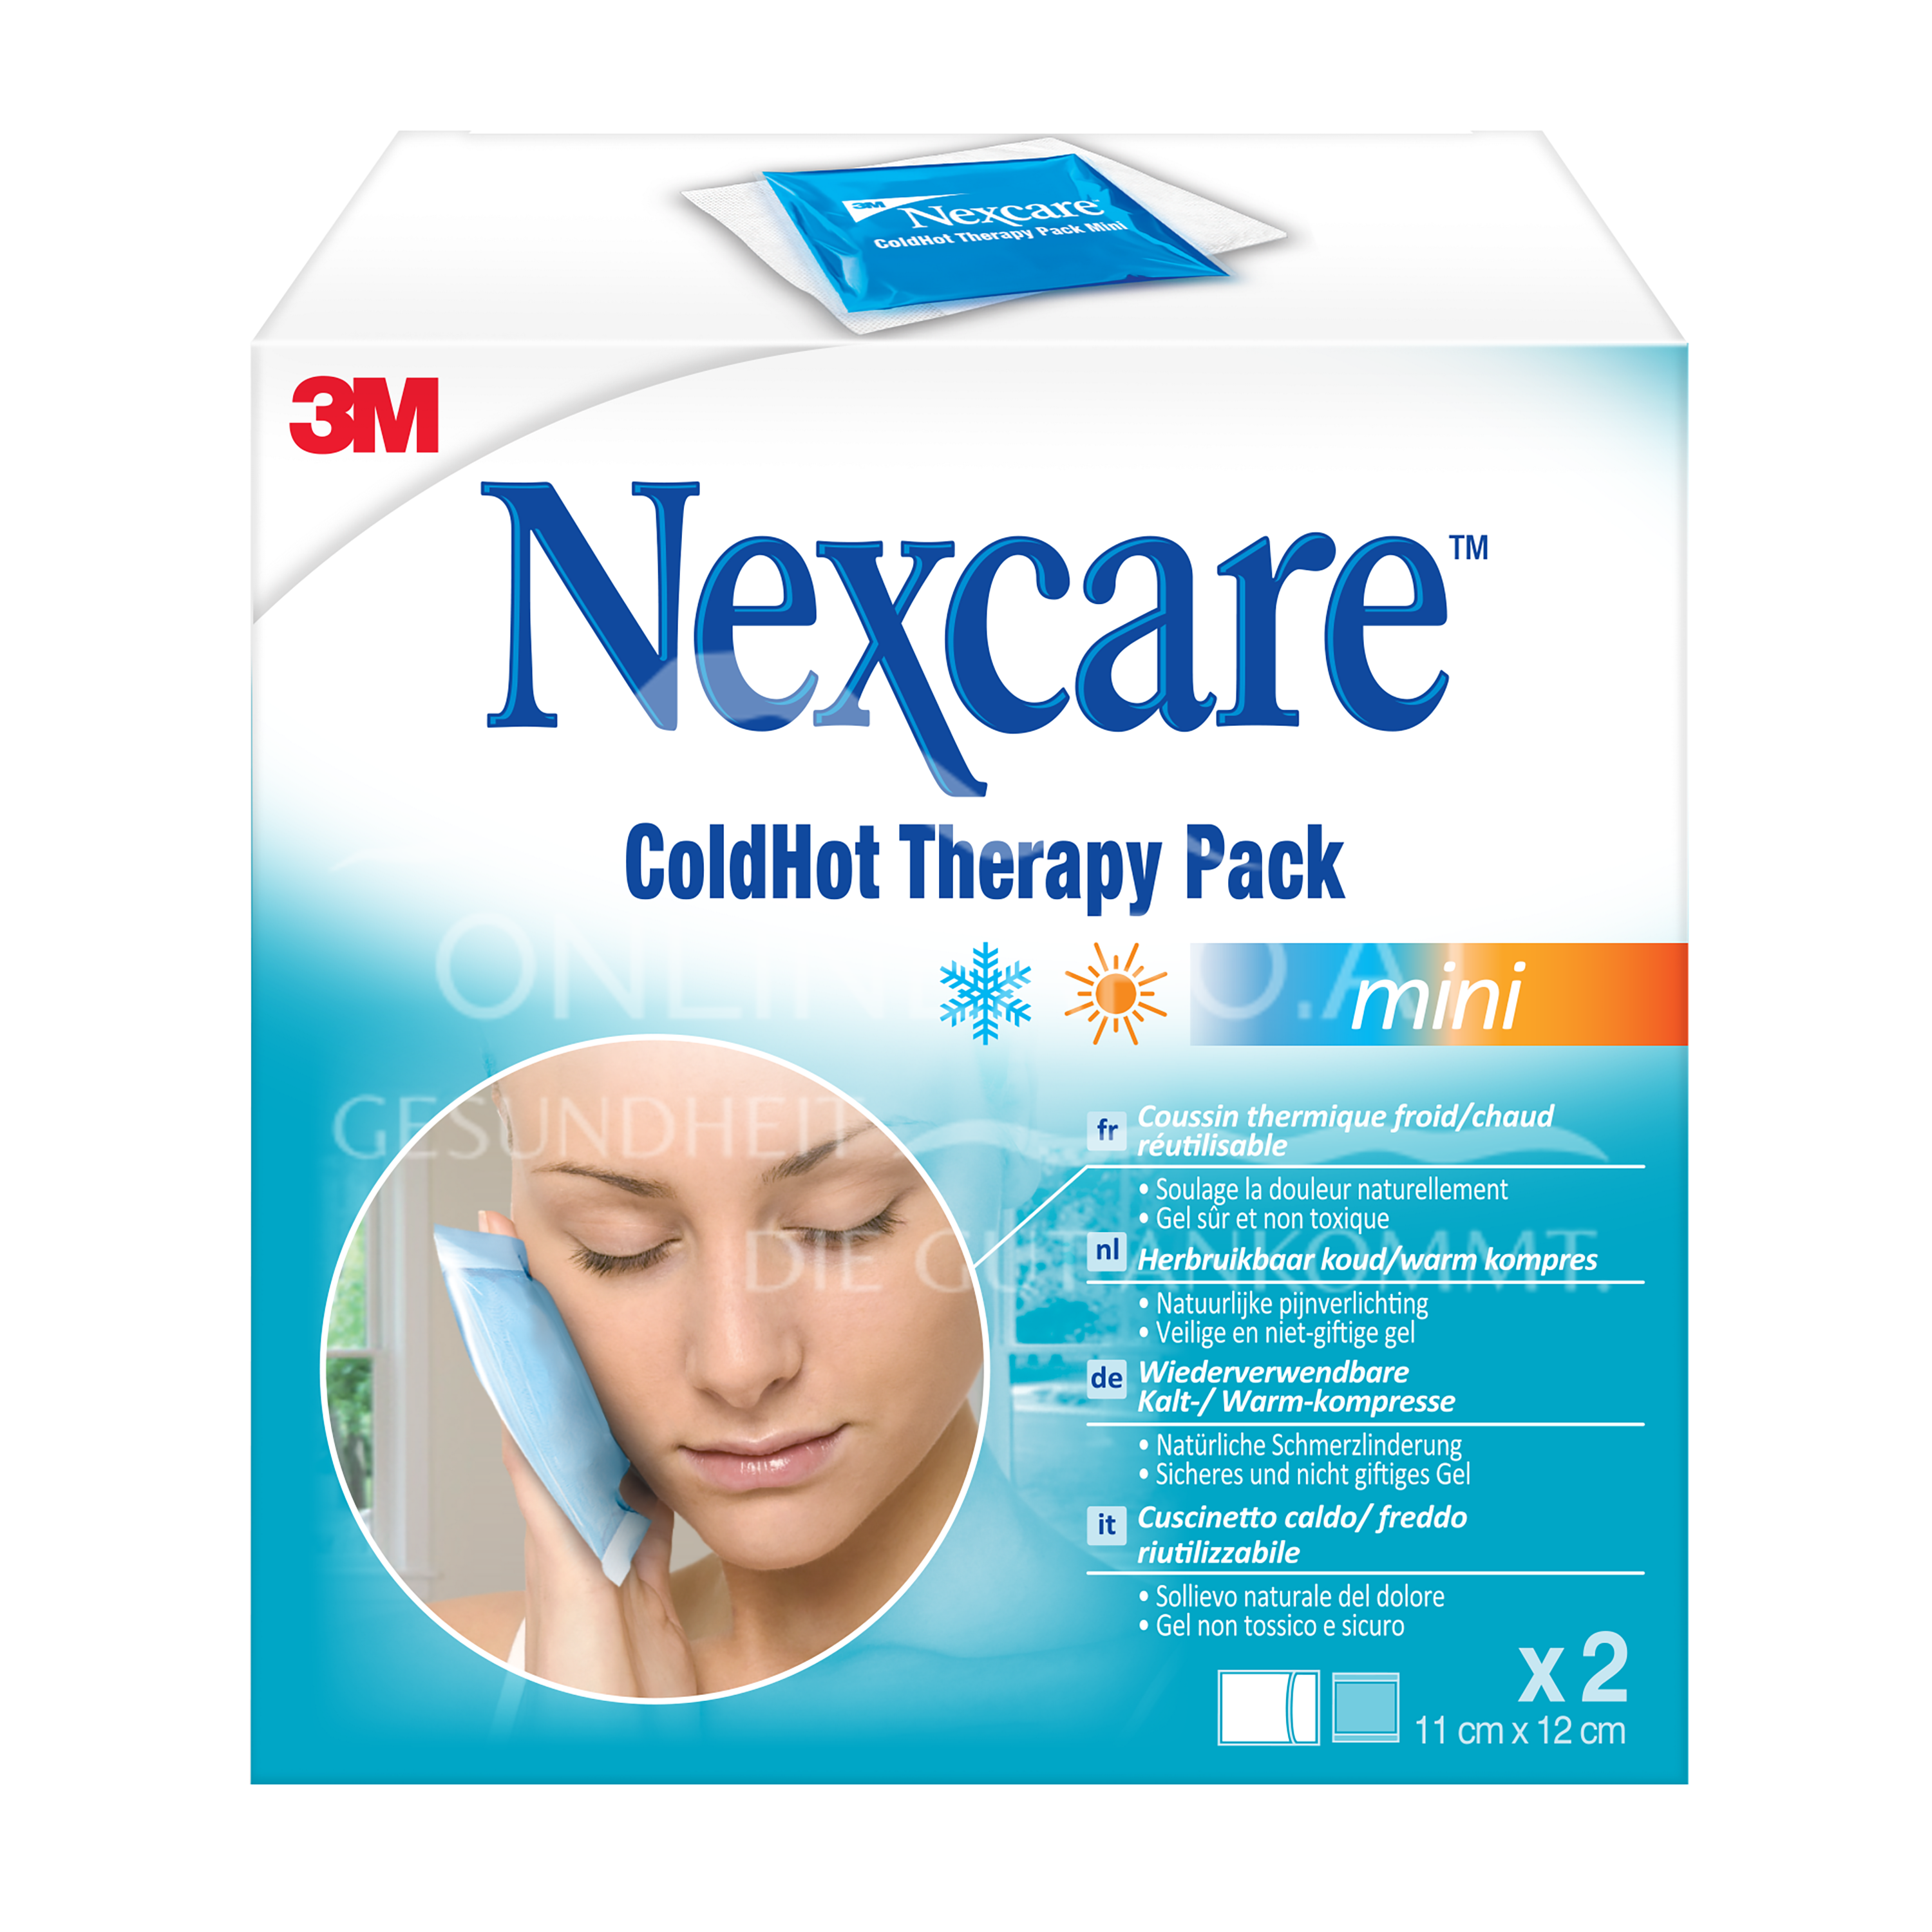 3M Nexcare™ ColdHot Therapy Pack Mini